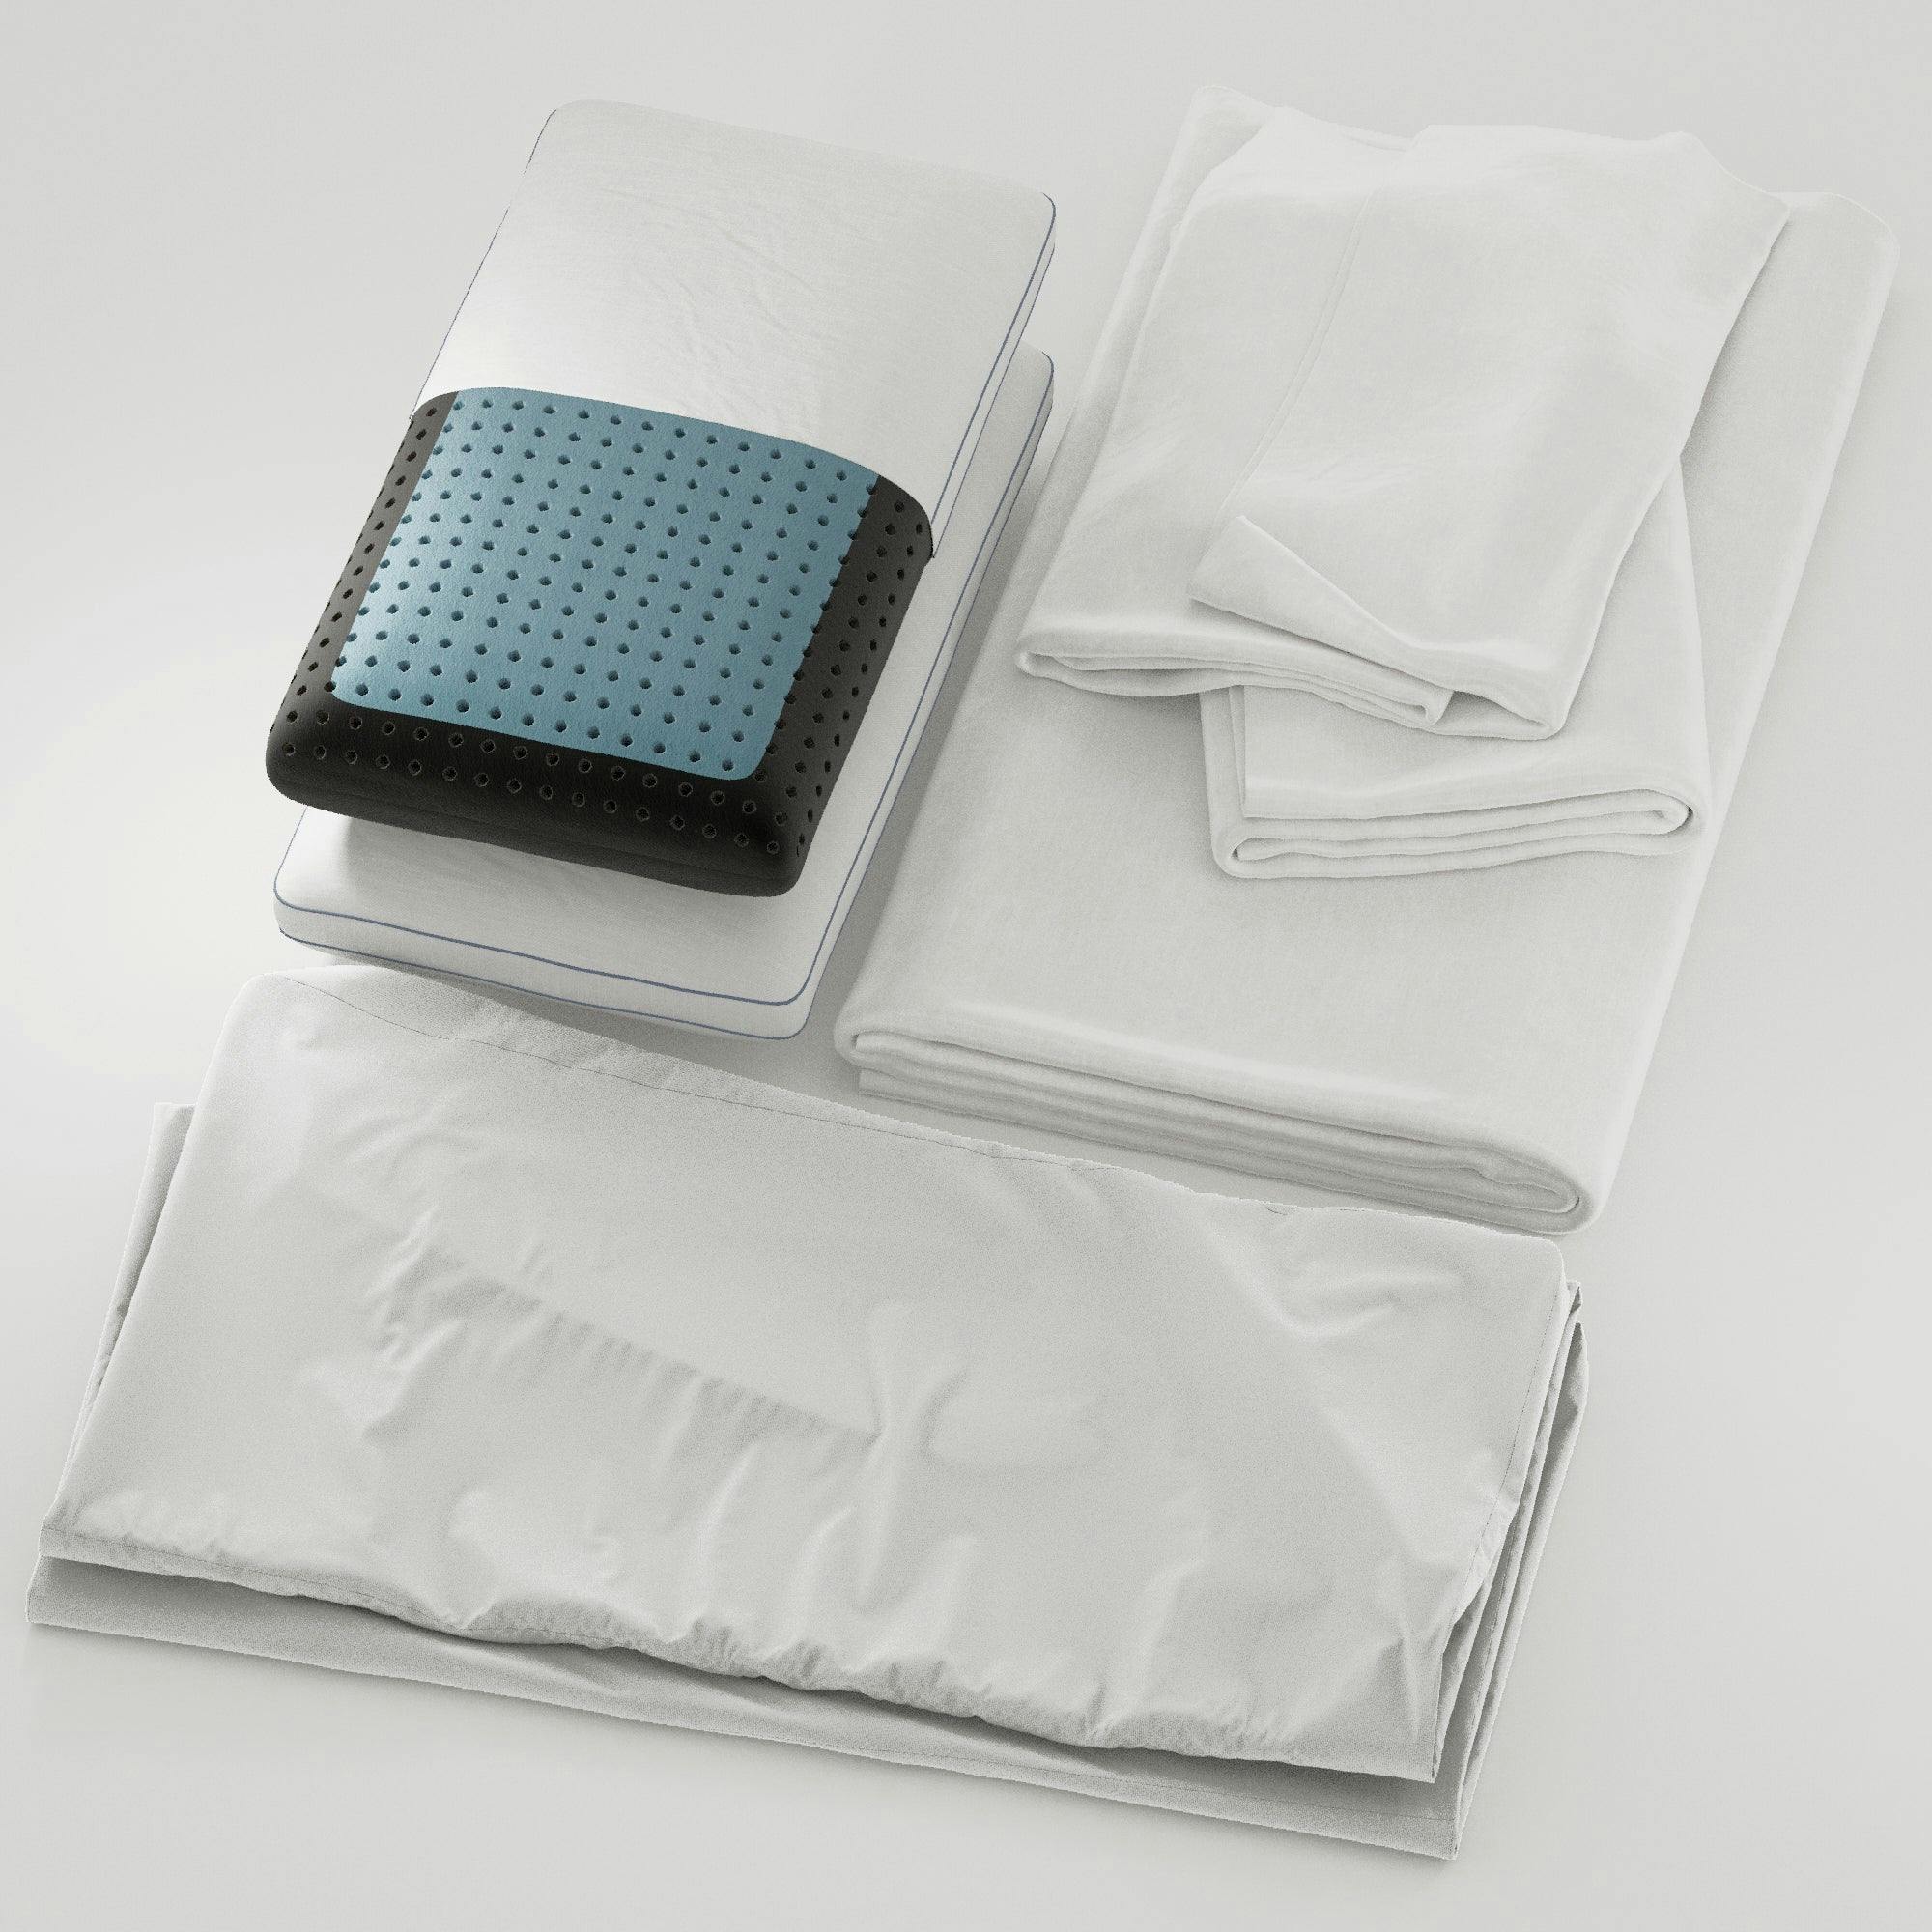 Eight Sleep - Sleep Essentials Bundle showing pillows, sheets, and protector